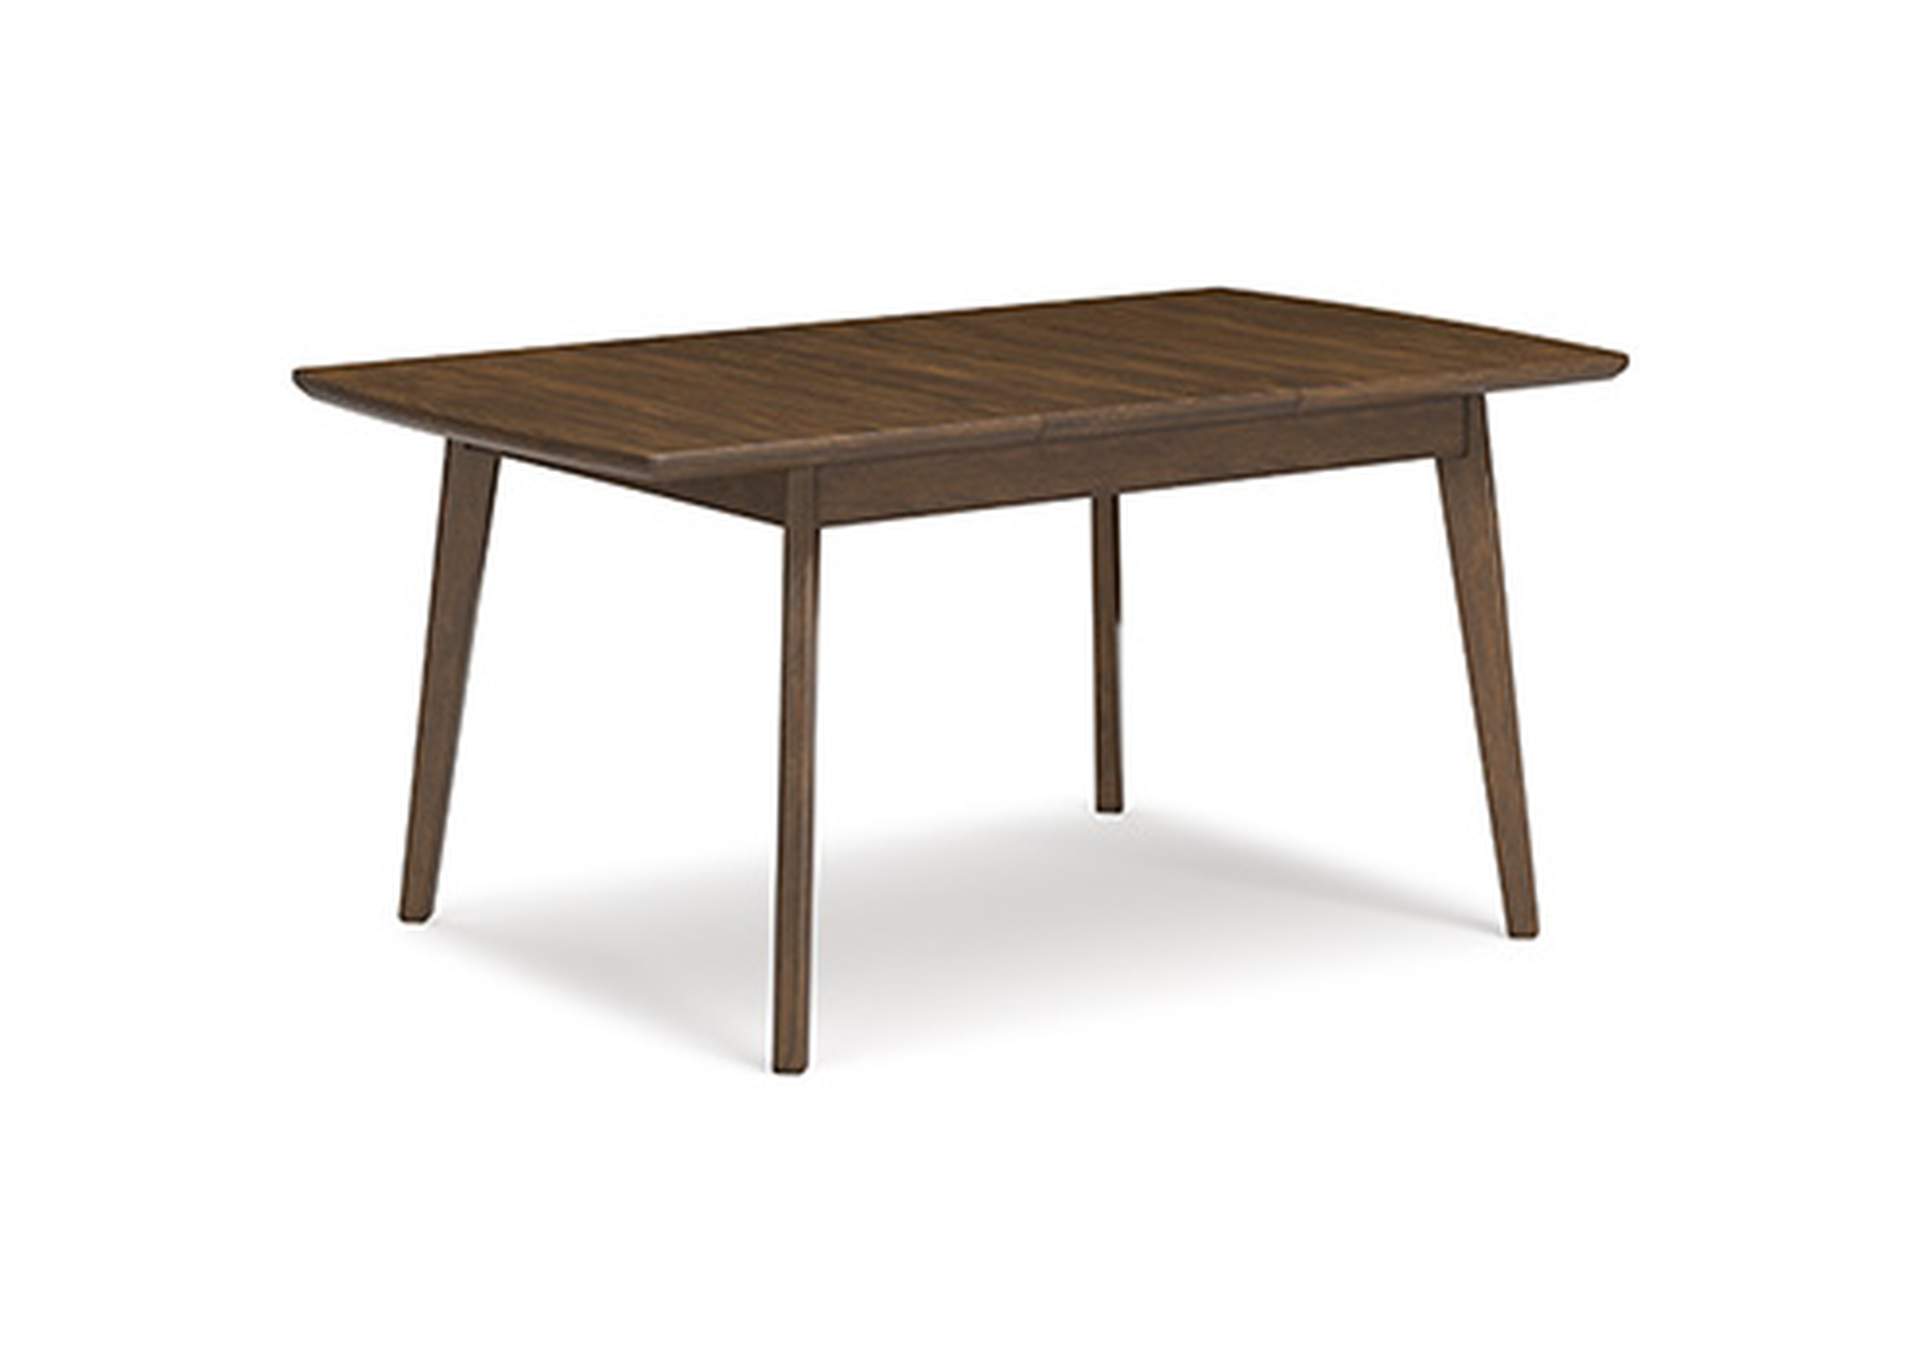 Lyncott Dining Extension Table,Signature Design By Ashley